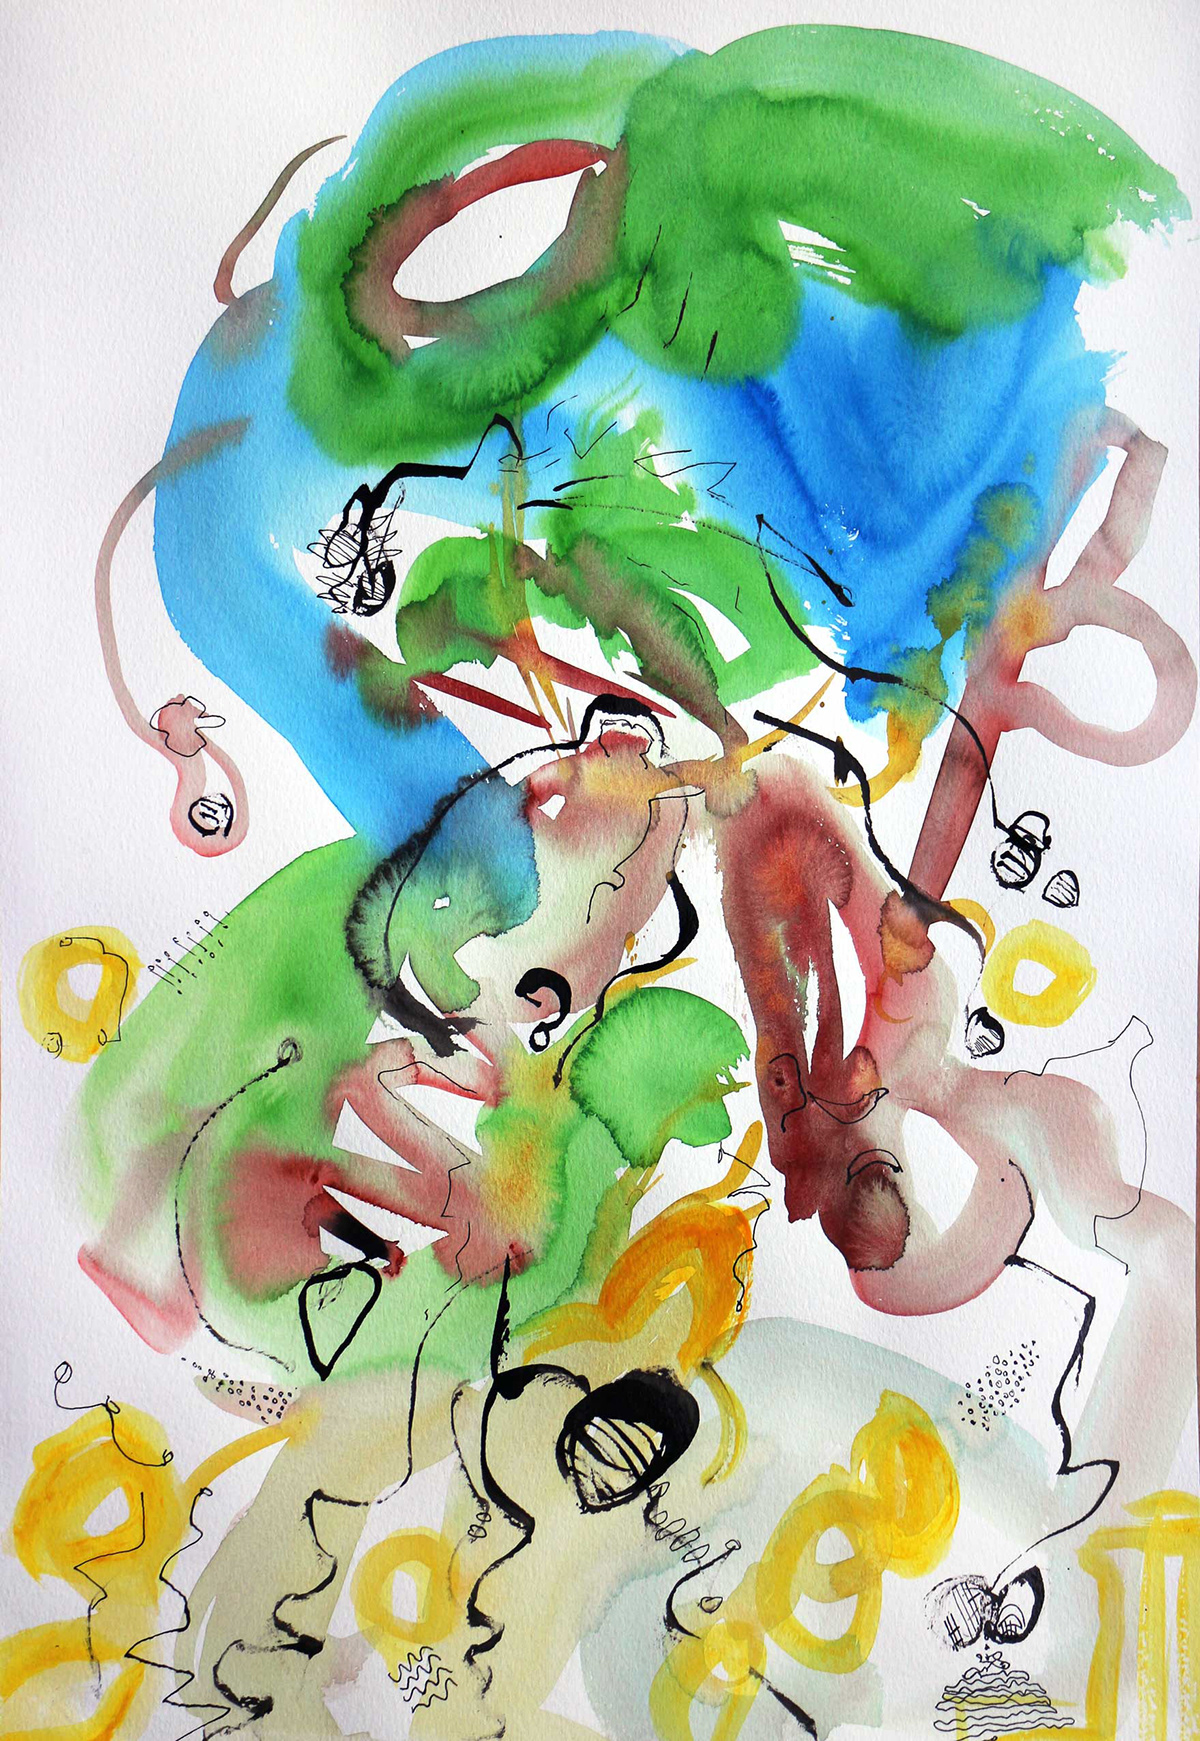 lost Nature maze plants animals humans abstract expressive Emotional